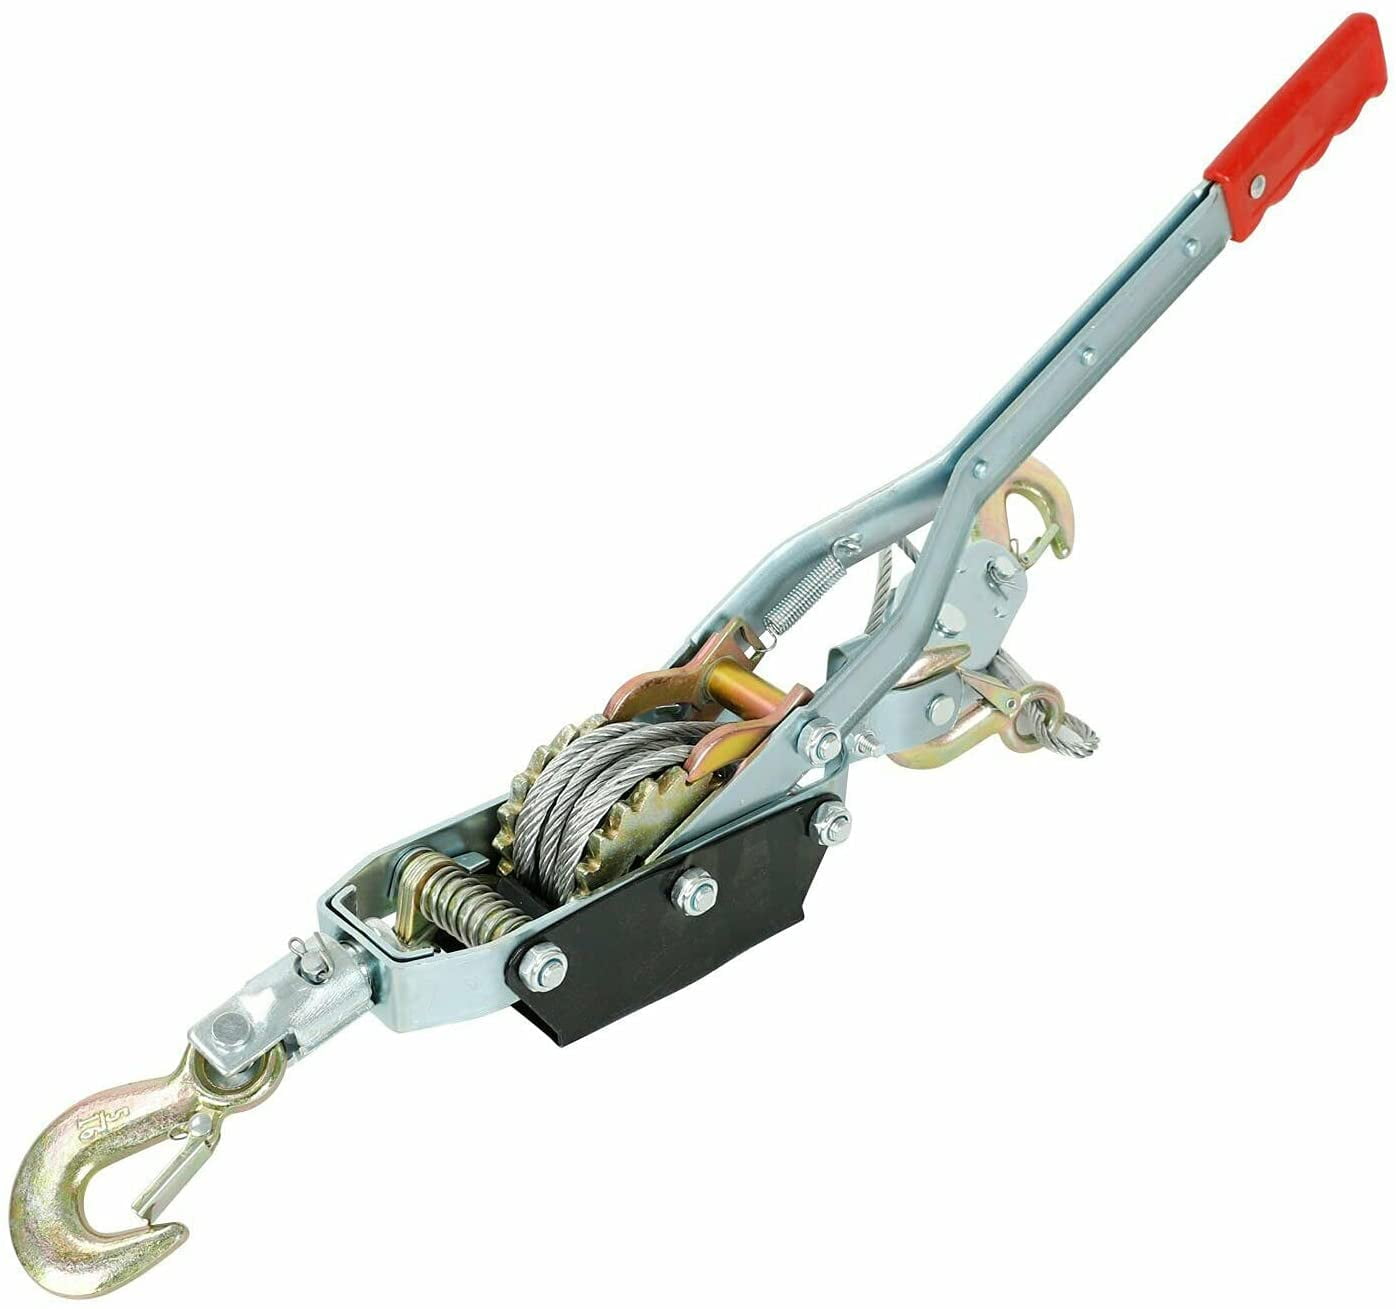 Heavy-Duty Dual Gear Hand Cable Puller Tool,Automotive Hoist Cable Puller 2-Ton Come Along Winch Power Puller 